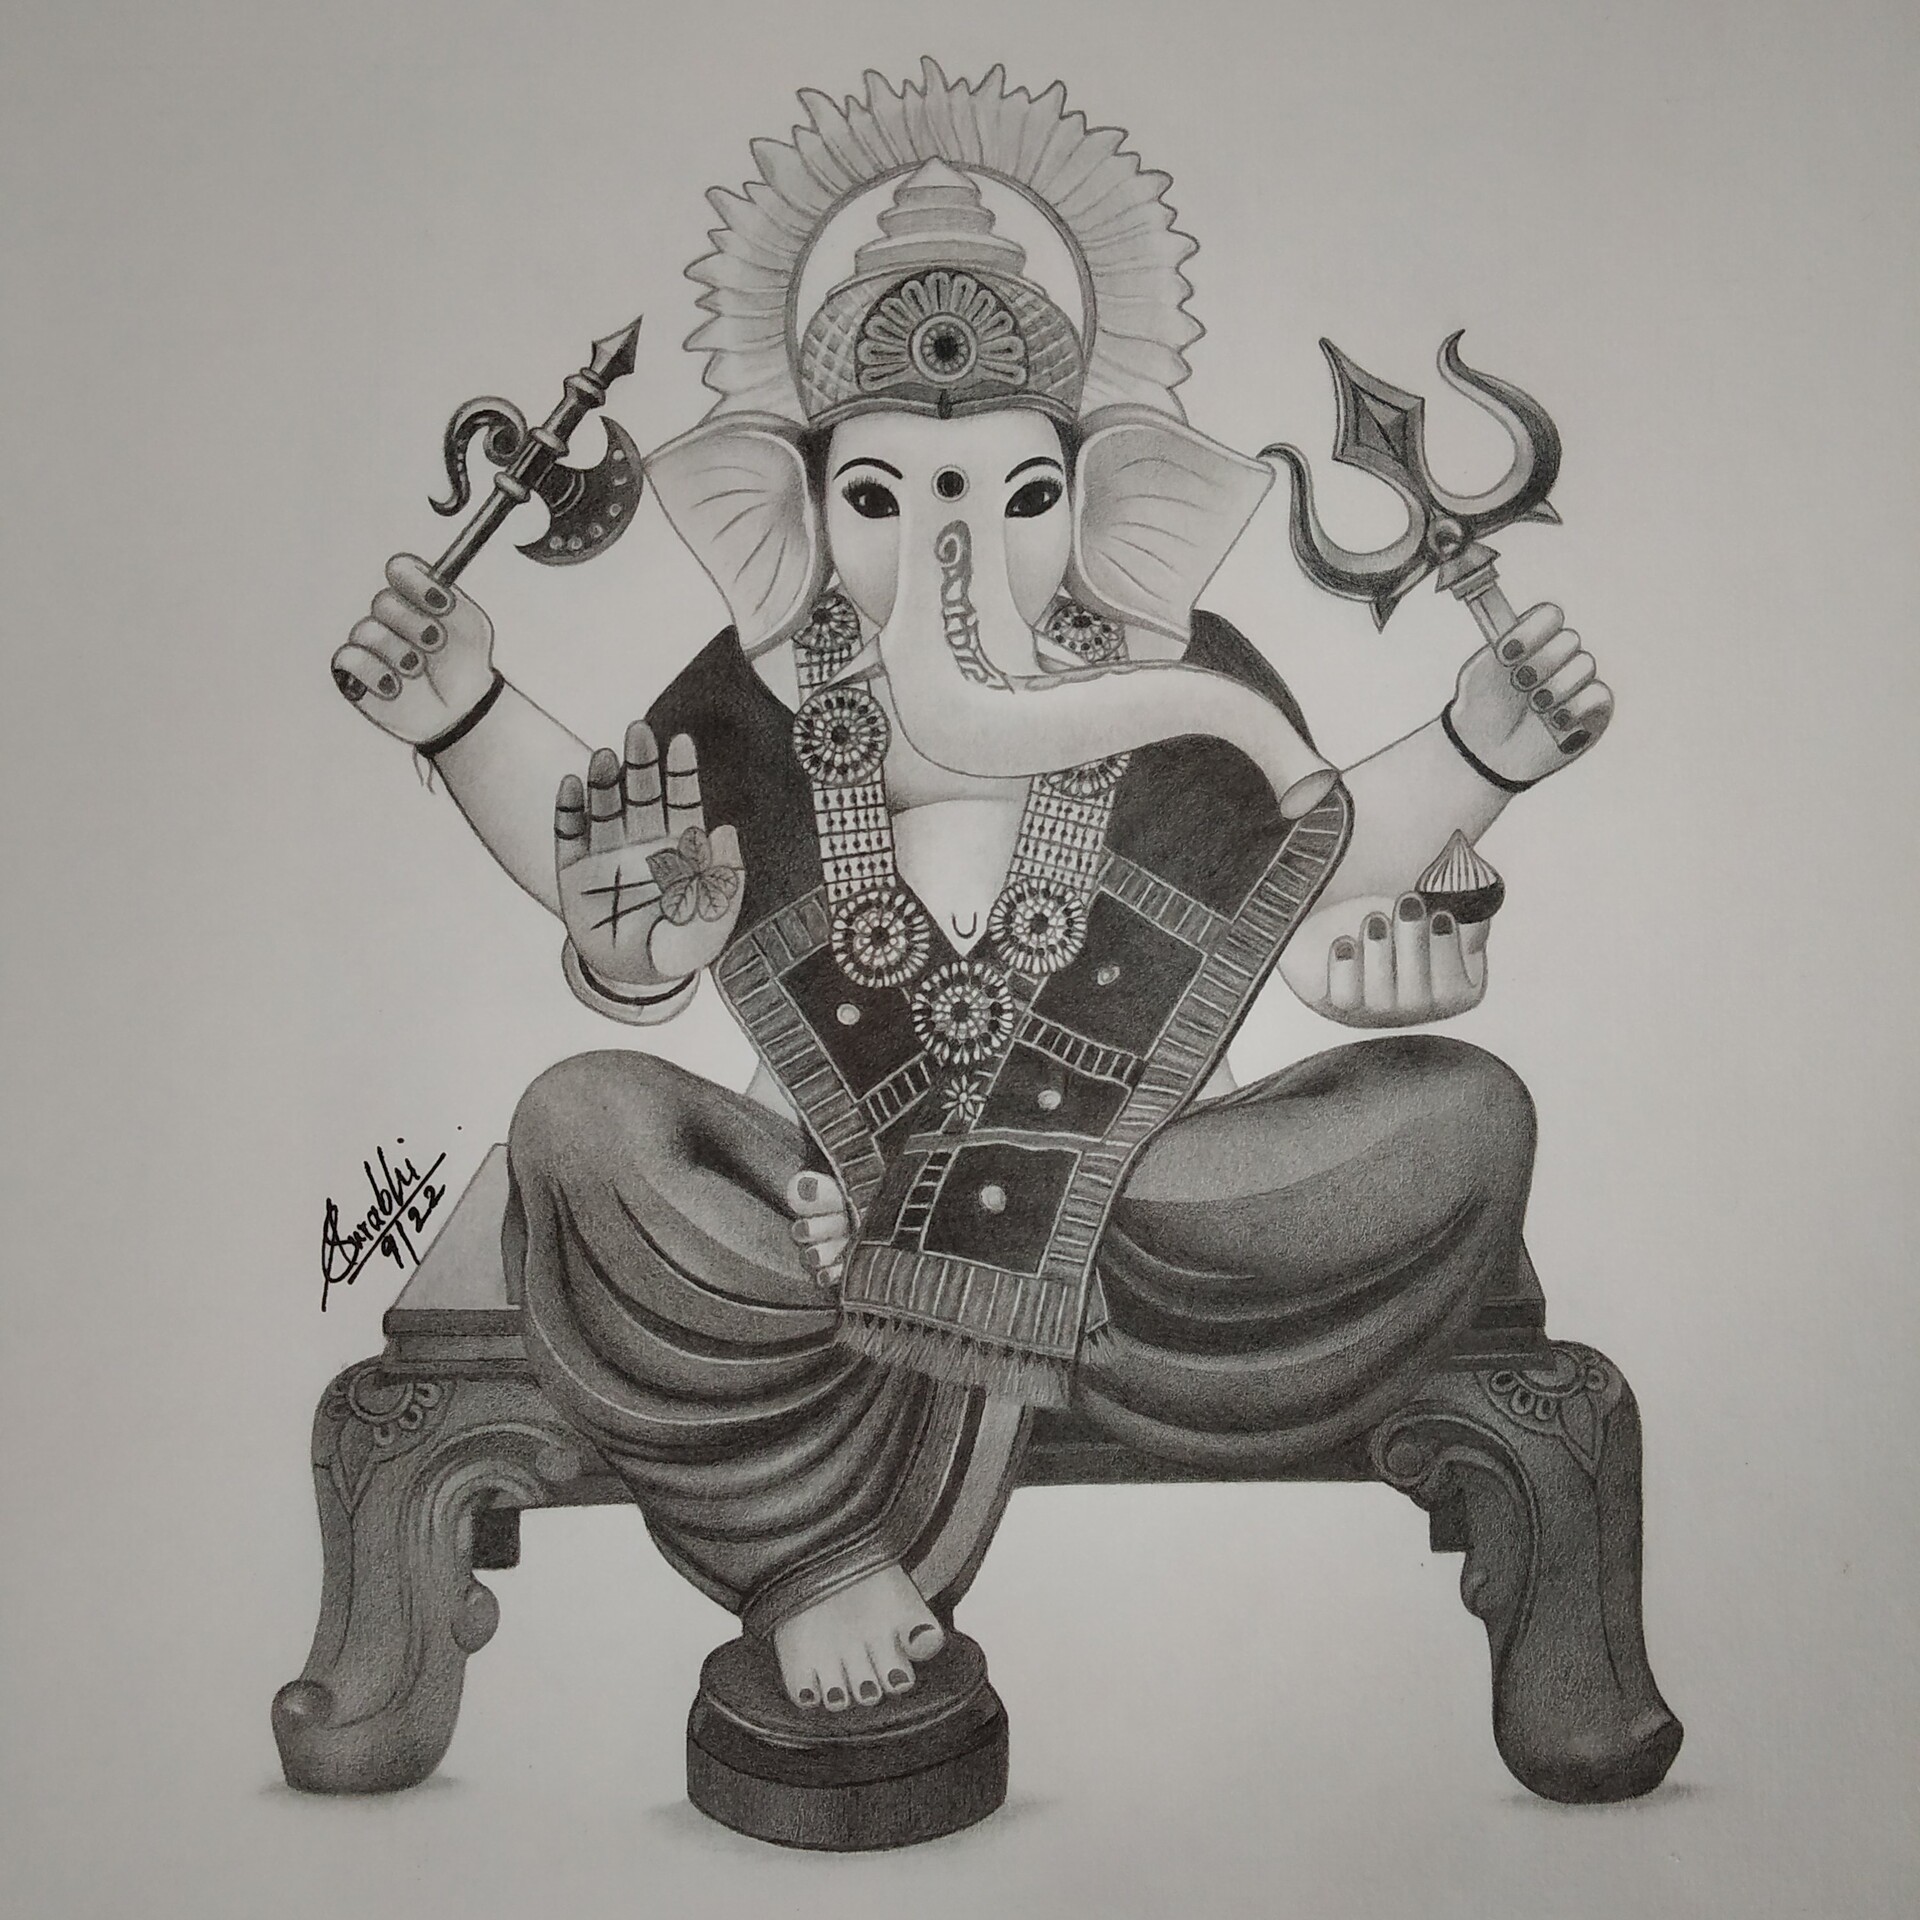 Buy Color Empire Printed Wooden Fridge Magents | Shree Ganesh Sketch |  Multipurpose Magents | Home Décor Online at Low Prices in India - Amazon.in